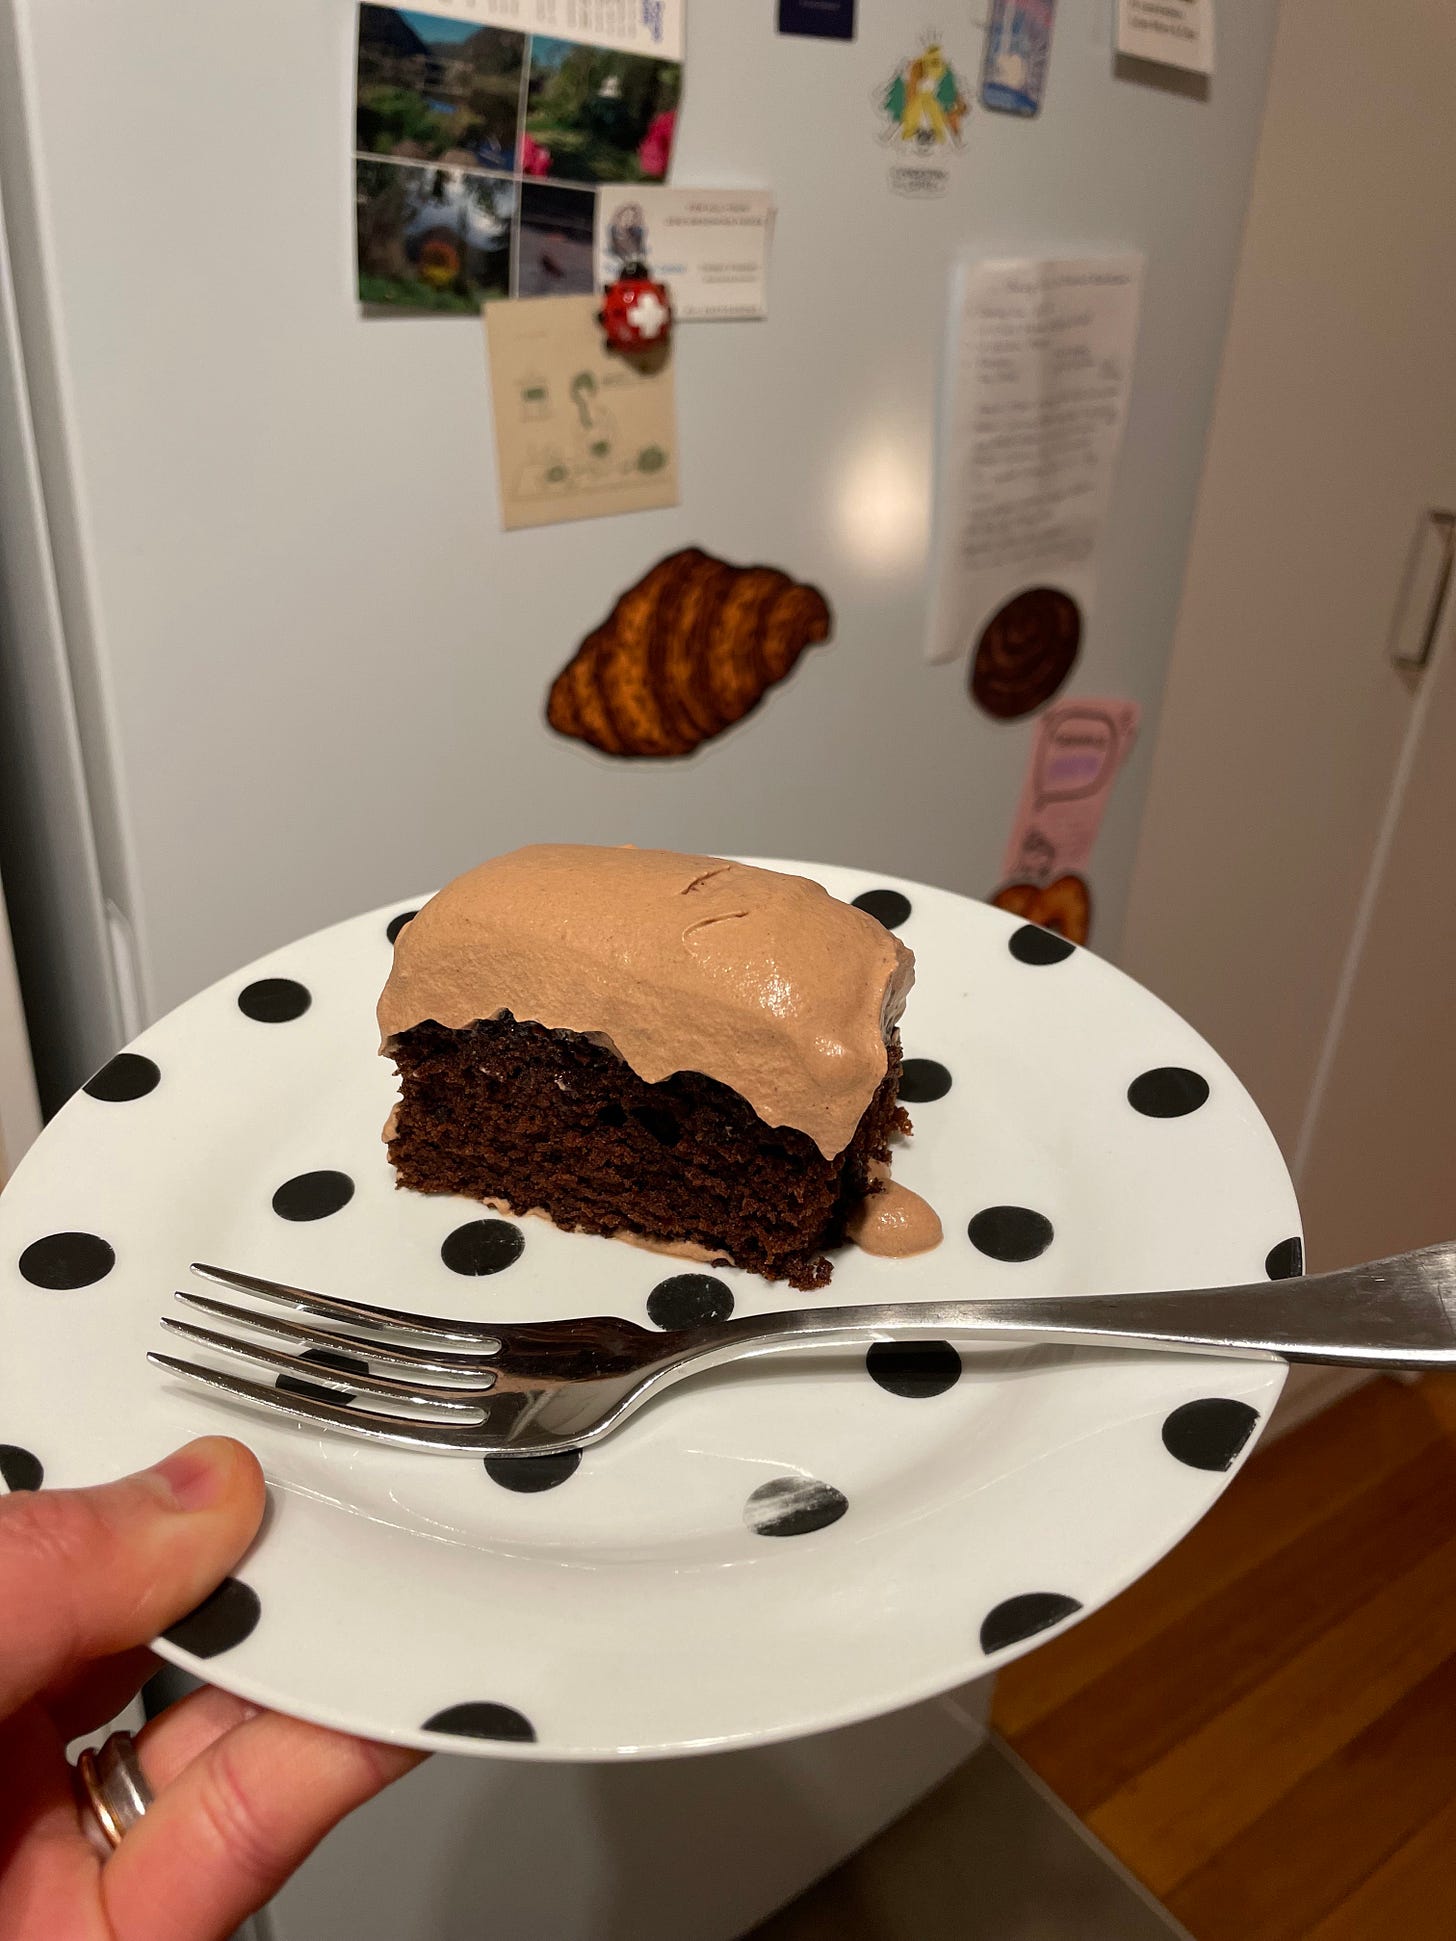 Slice of chocolate cake with whipped cream icing with a fridge in the background